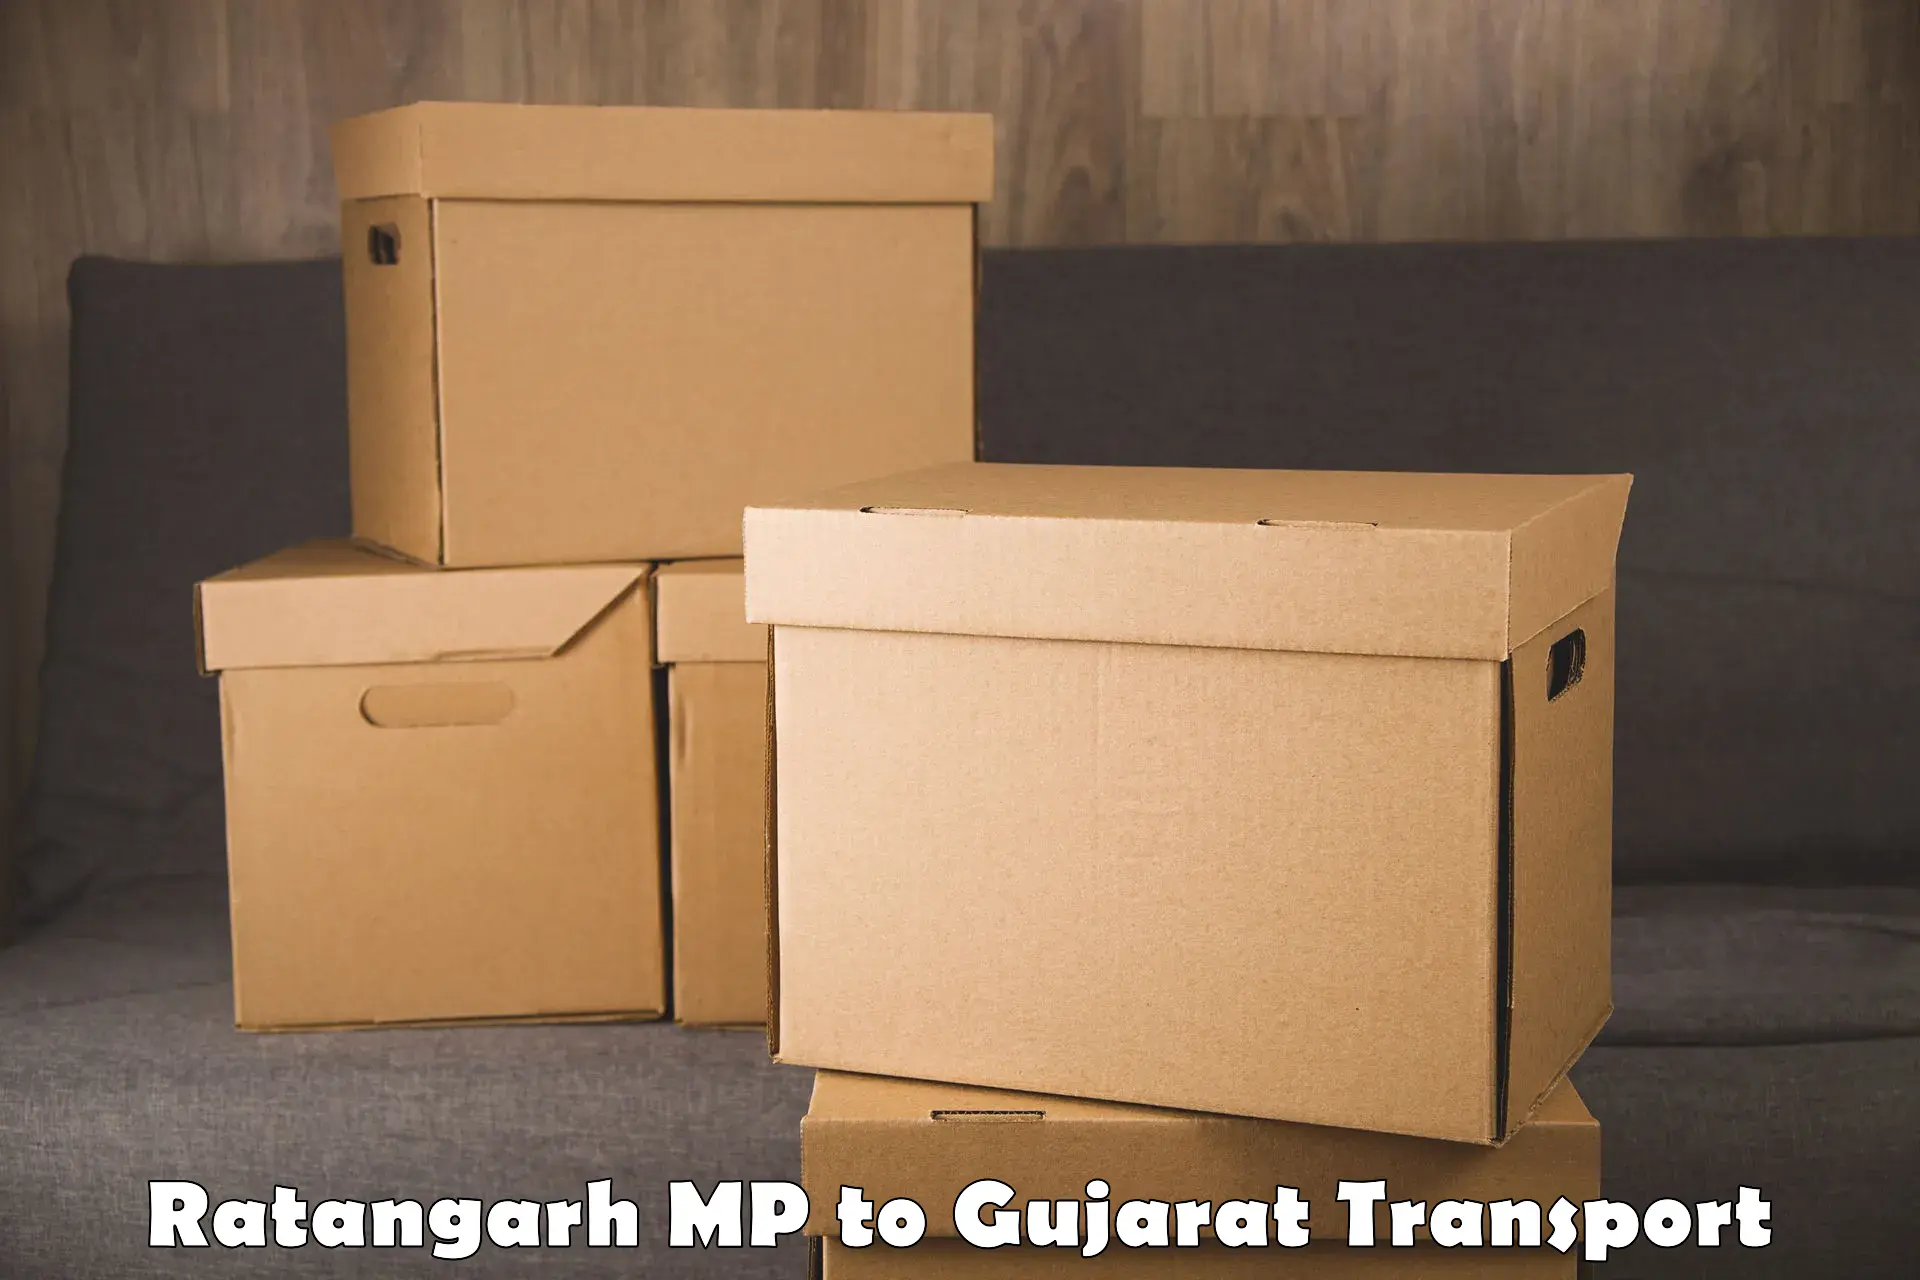 Commercial transport service Ratangarh MP to Dharmasala